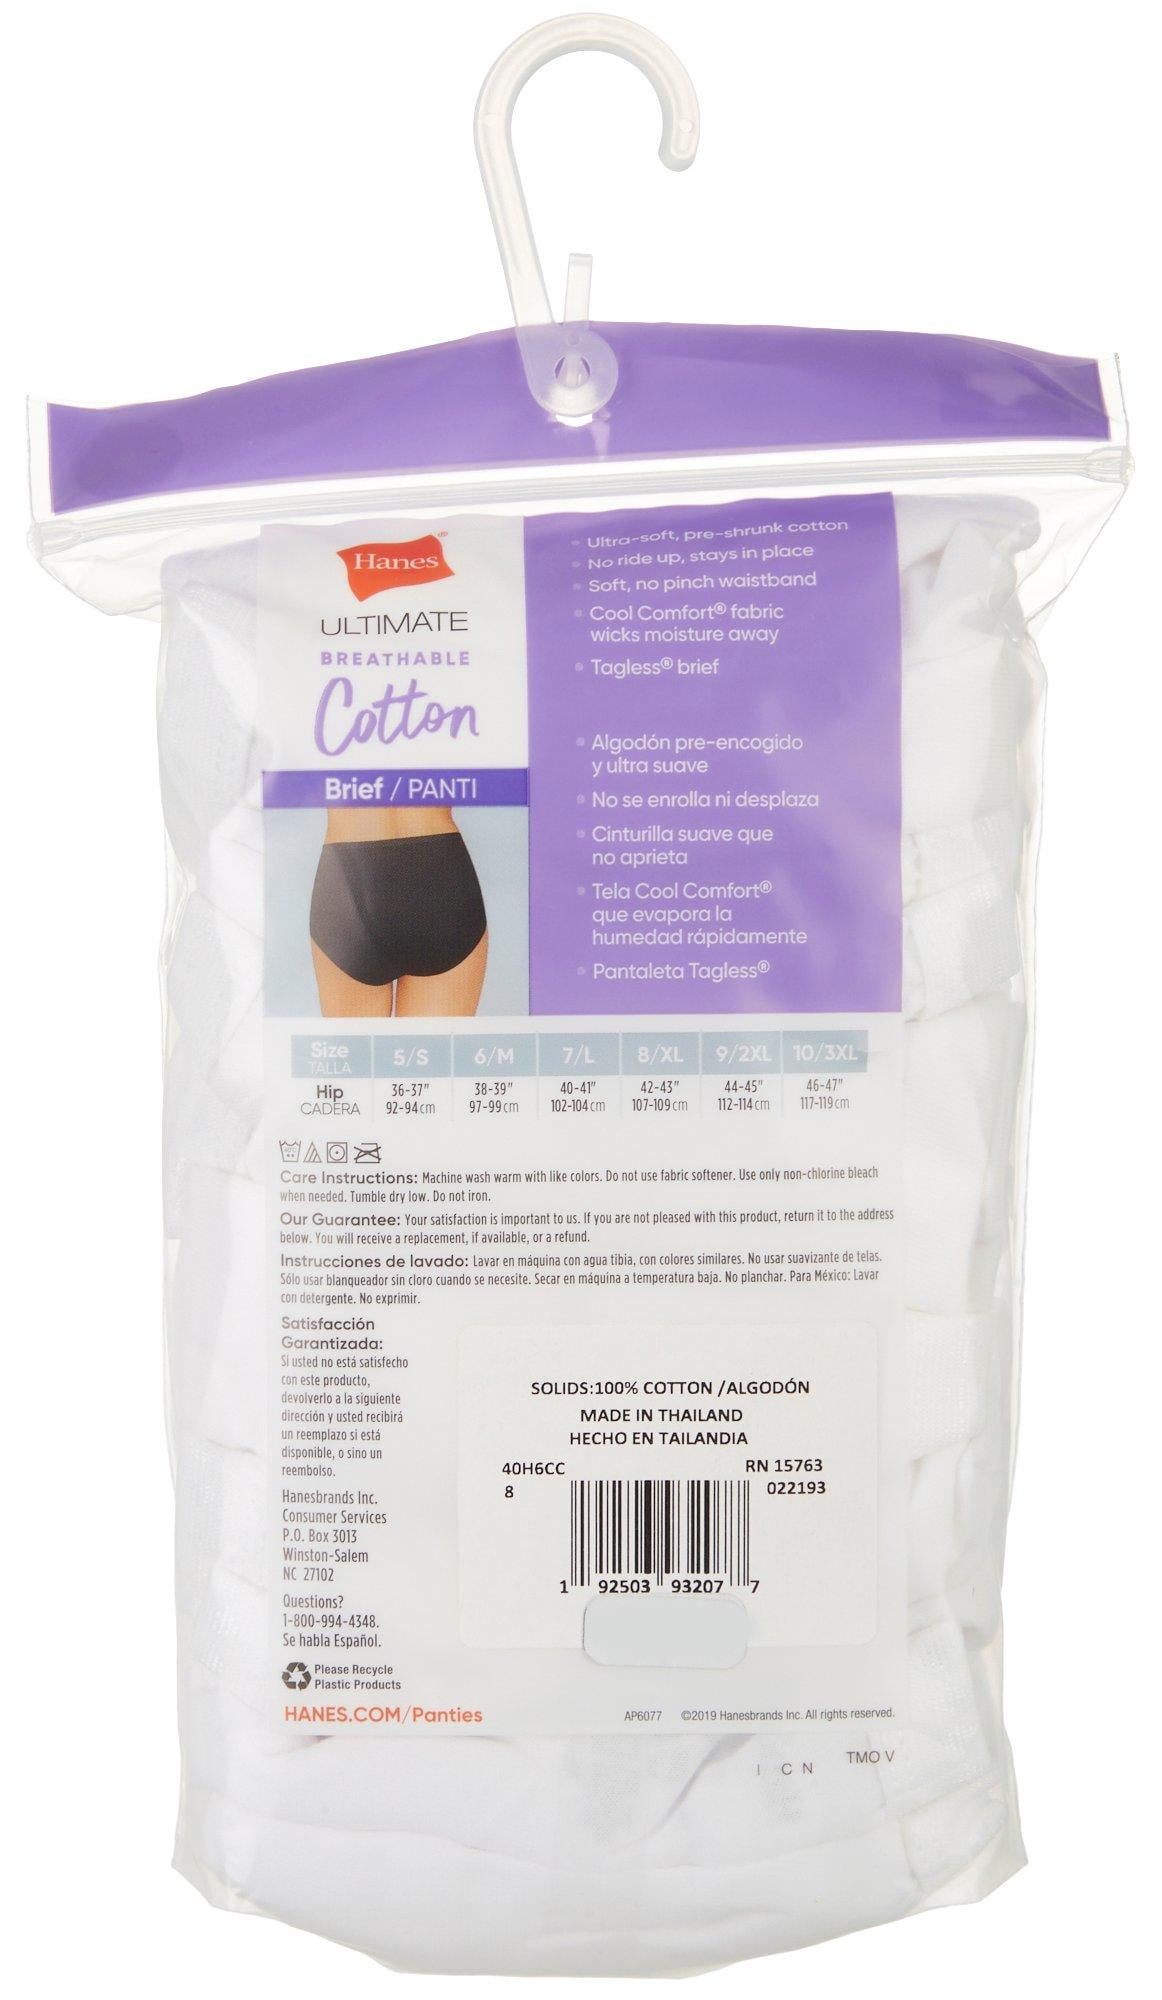 Hanes Ultimate Women's Breathable Brief Underwear, 6-Pack Soft  Taupe/White/Nude/Light Buff/Nude Heather/Sugar Flower Sweet Dot 10 